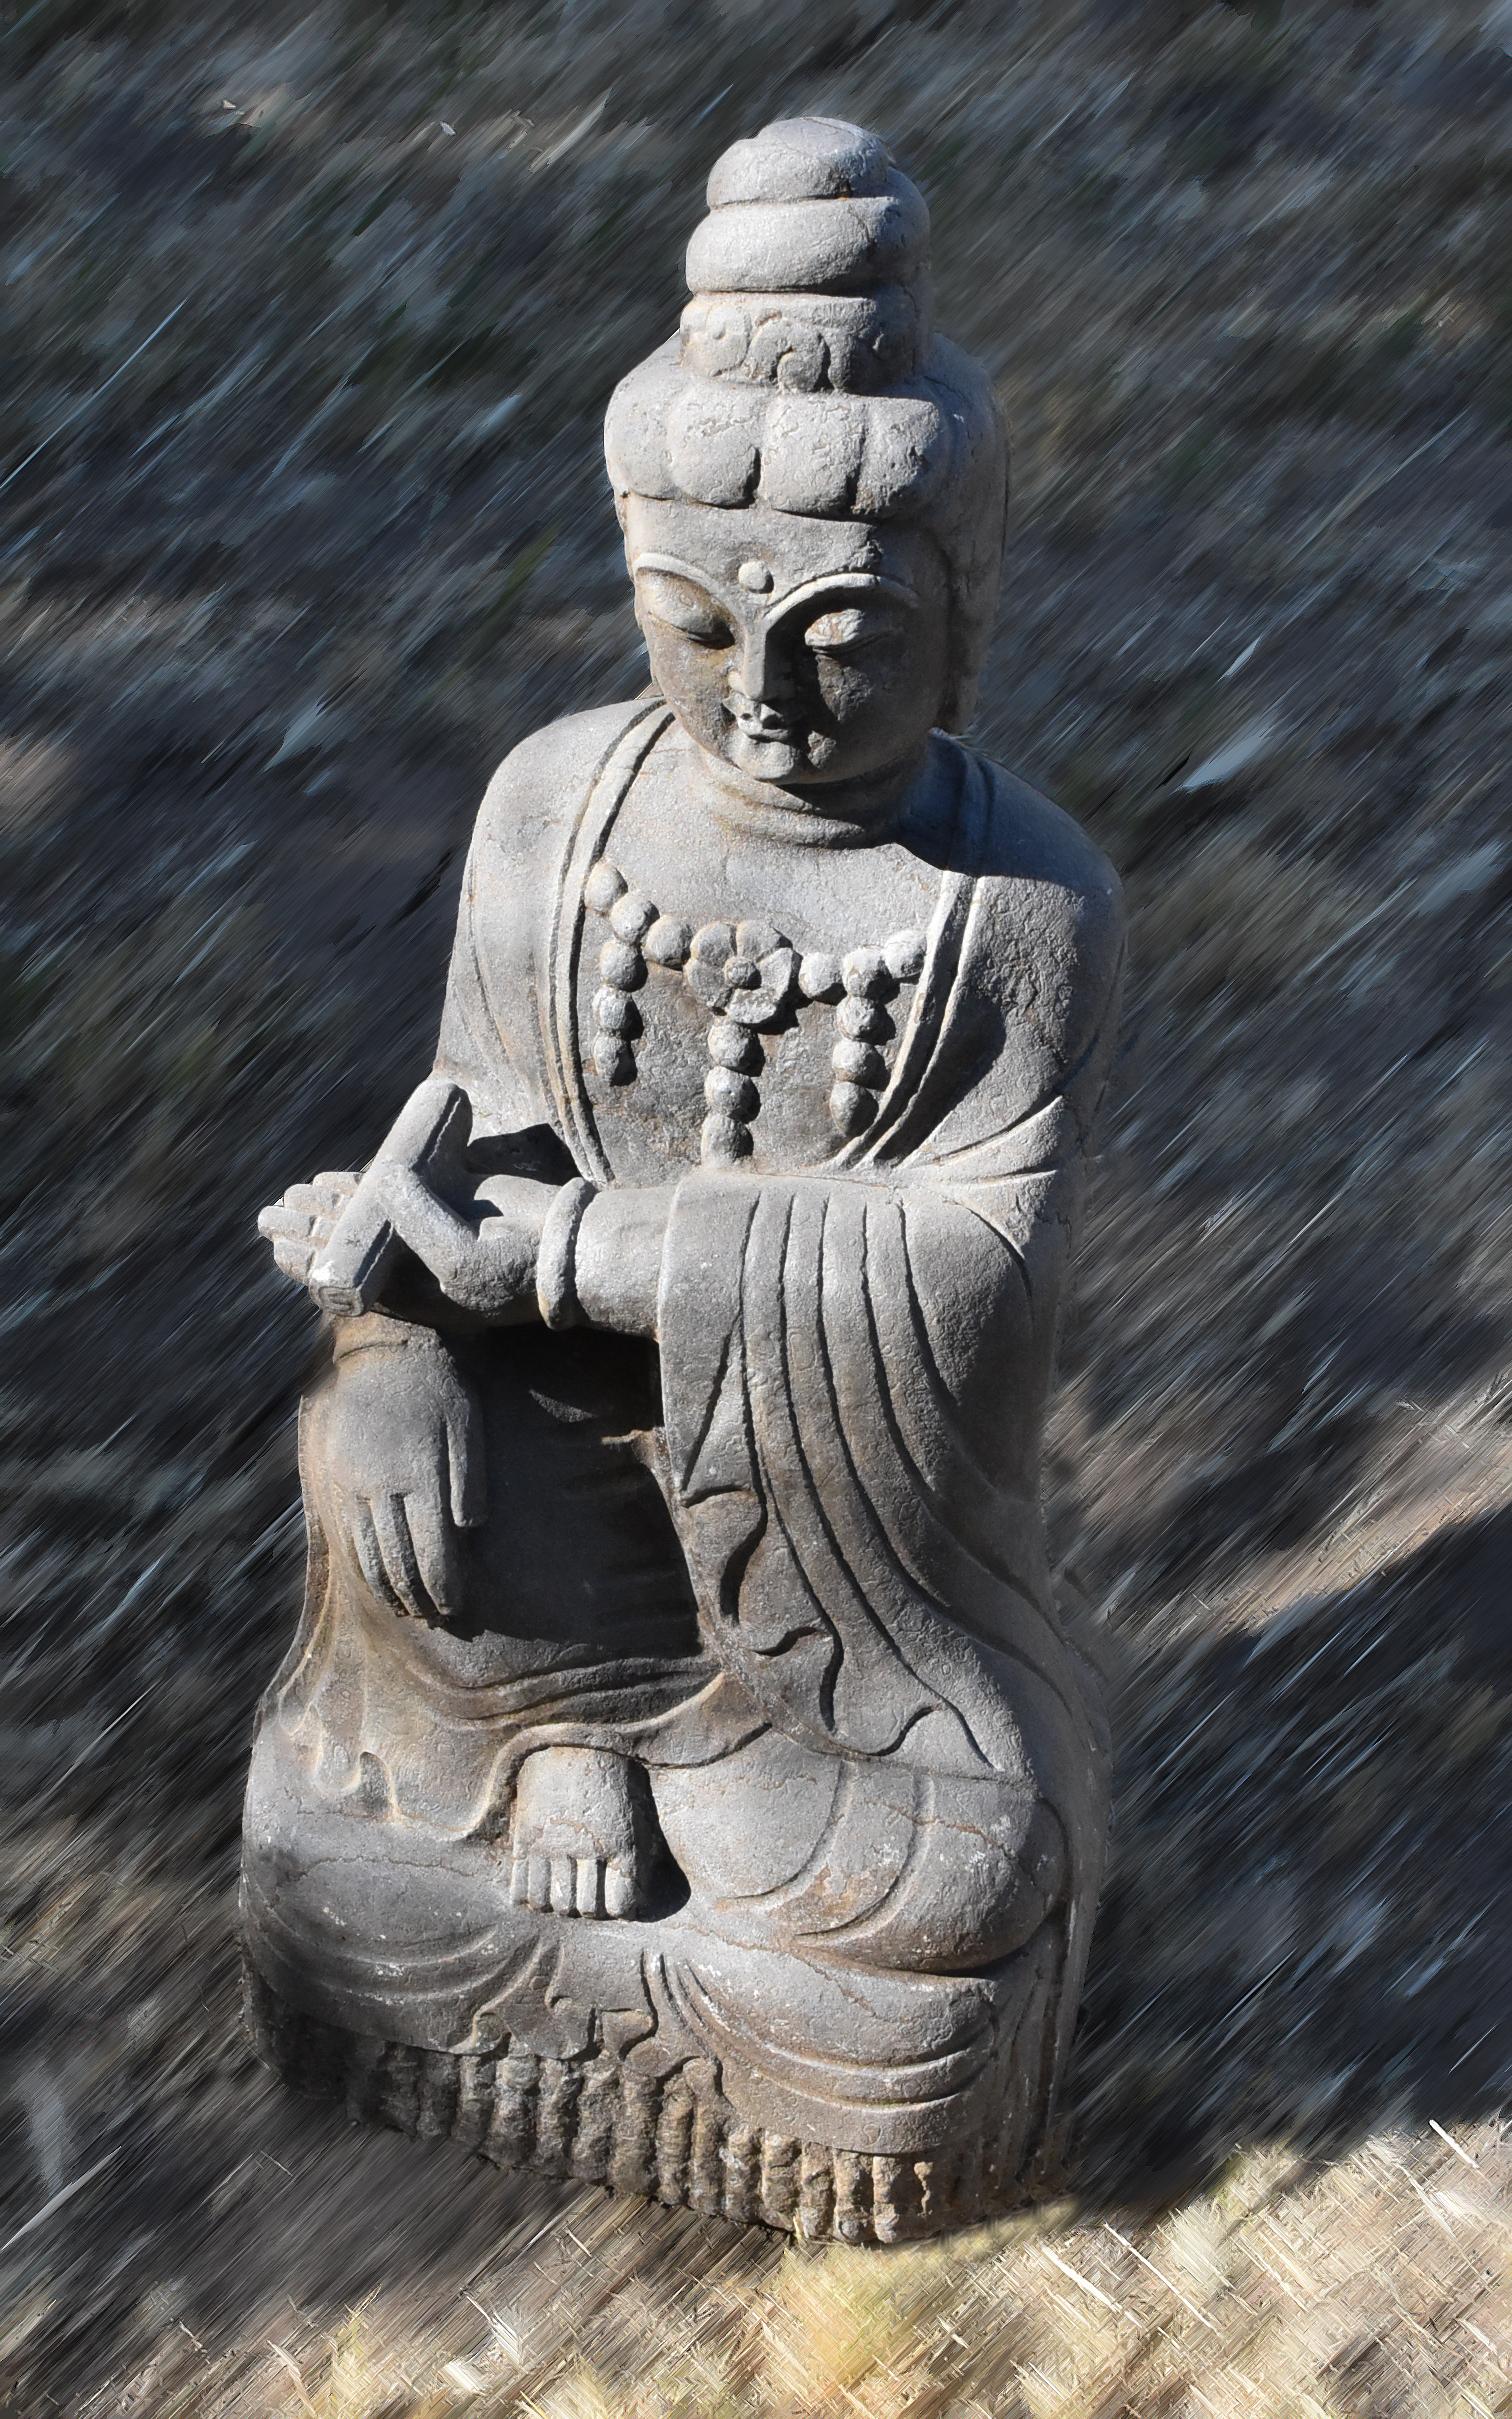 A beautiful hand carved statue of Goddess of Compassion, Kwan Yin, as a teacher. Kwan Yin is seated with her right hand on the right leg up on a solid base, left hand holding a scroll of book. Dressed in a robe draping over her torso, covering both